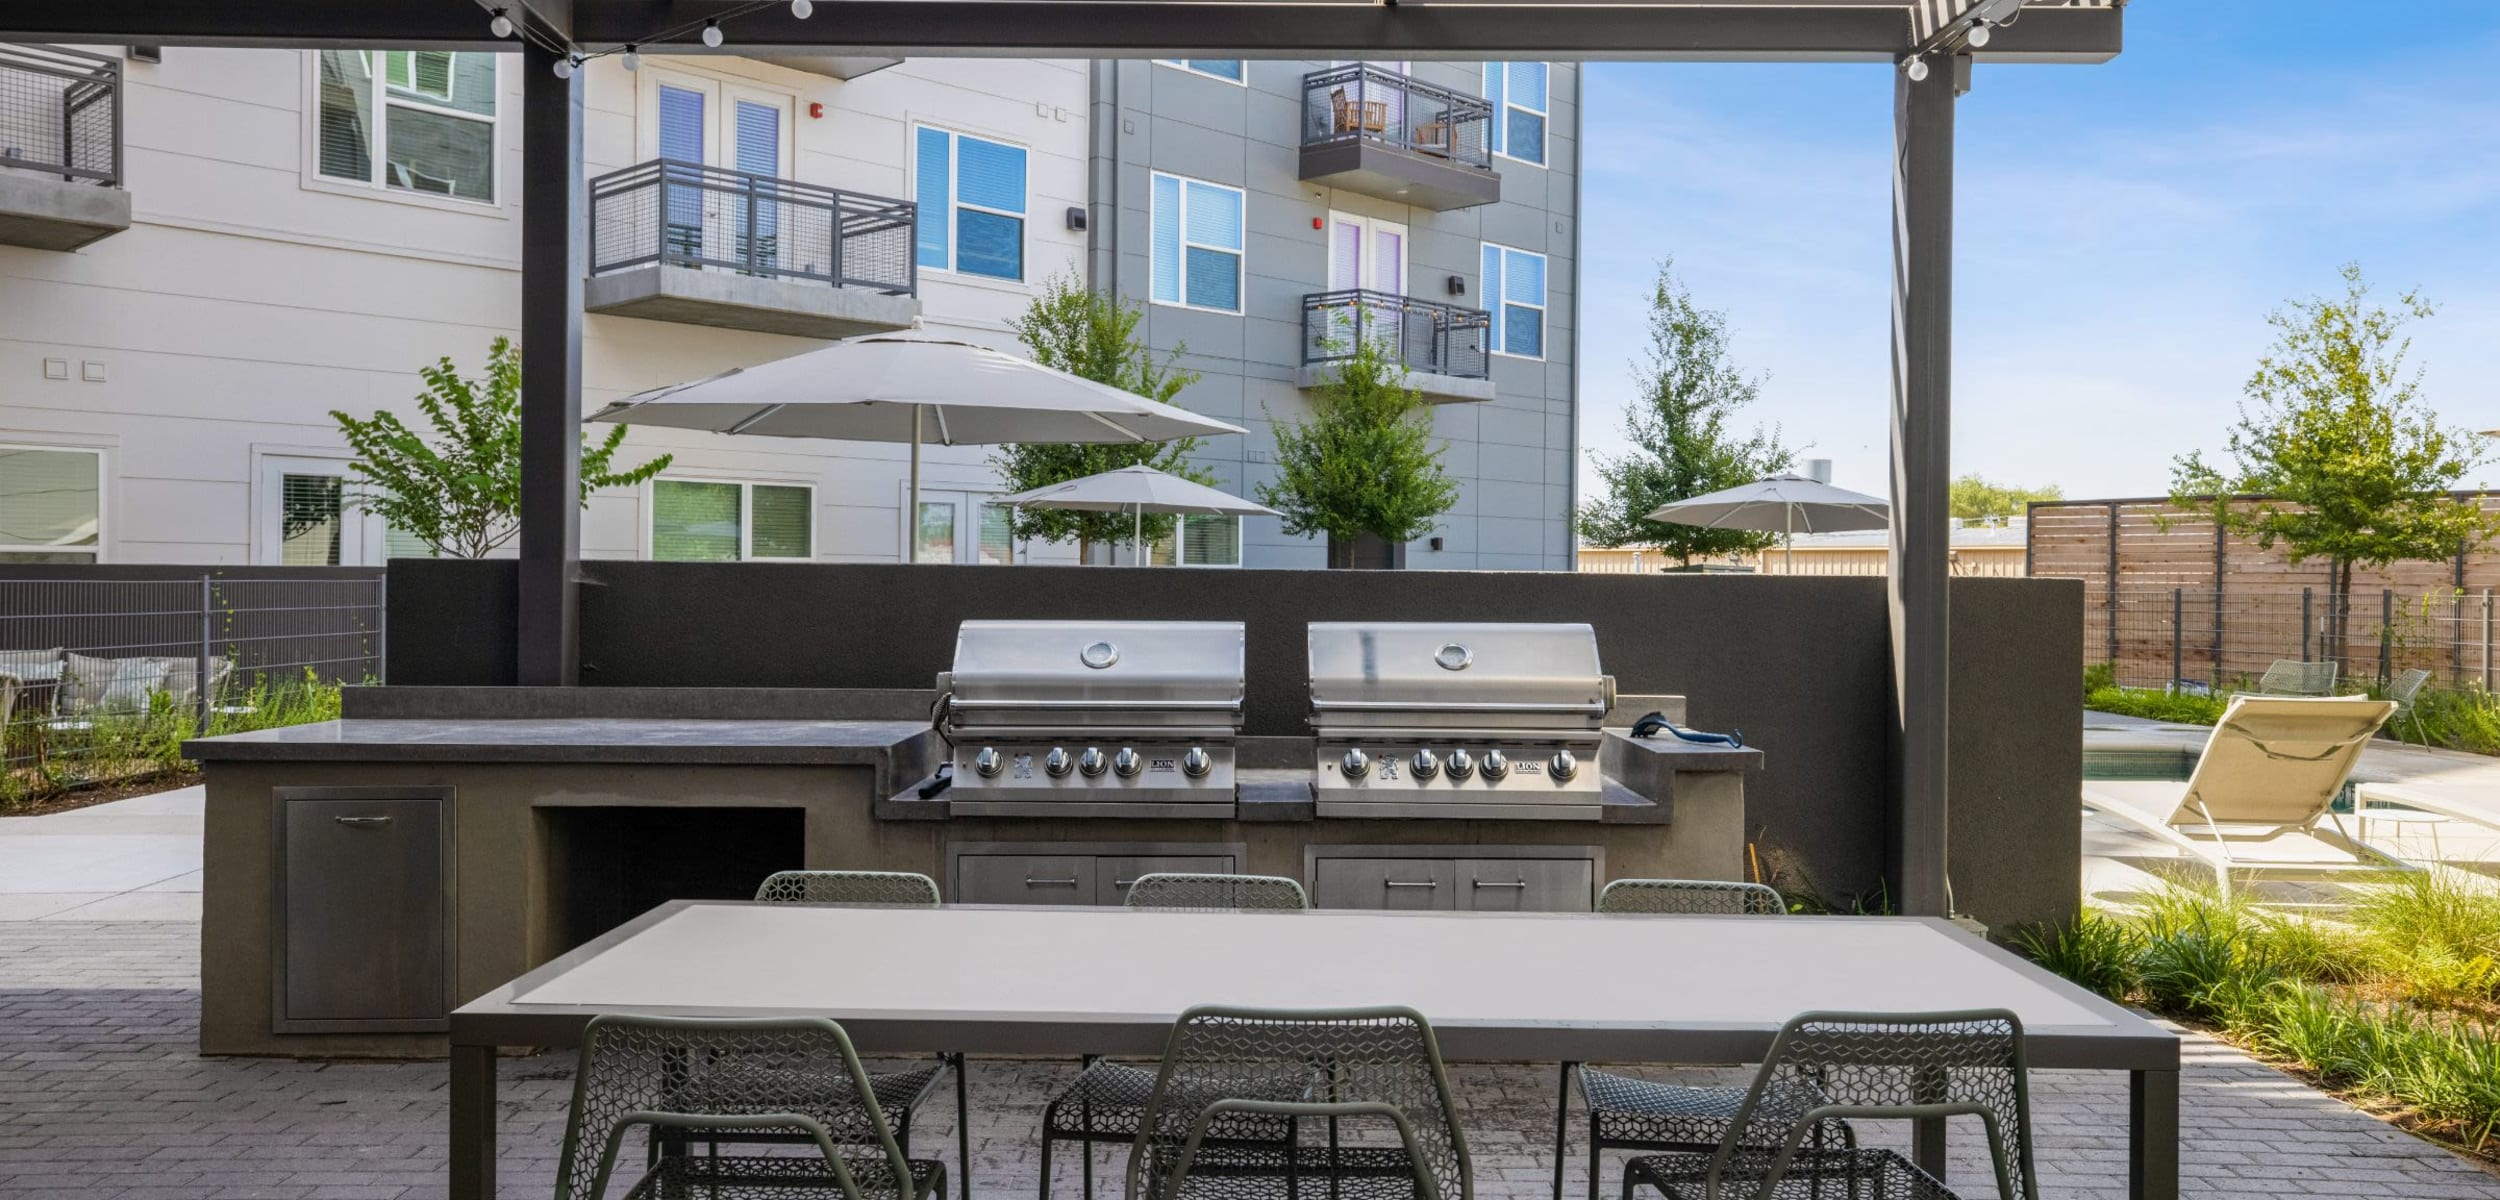 Grilling area at 44 South in Austin, Texas